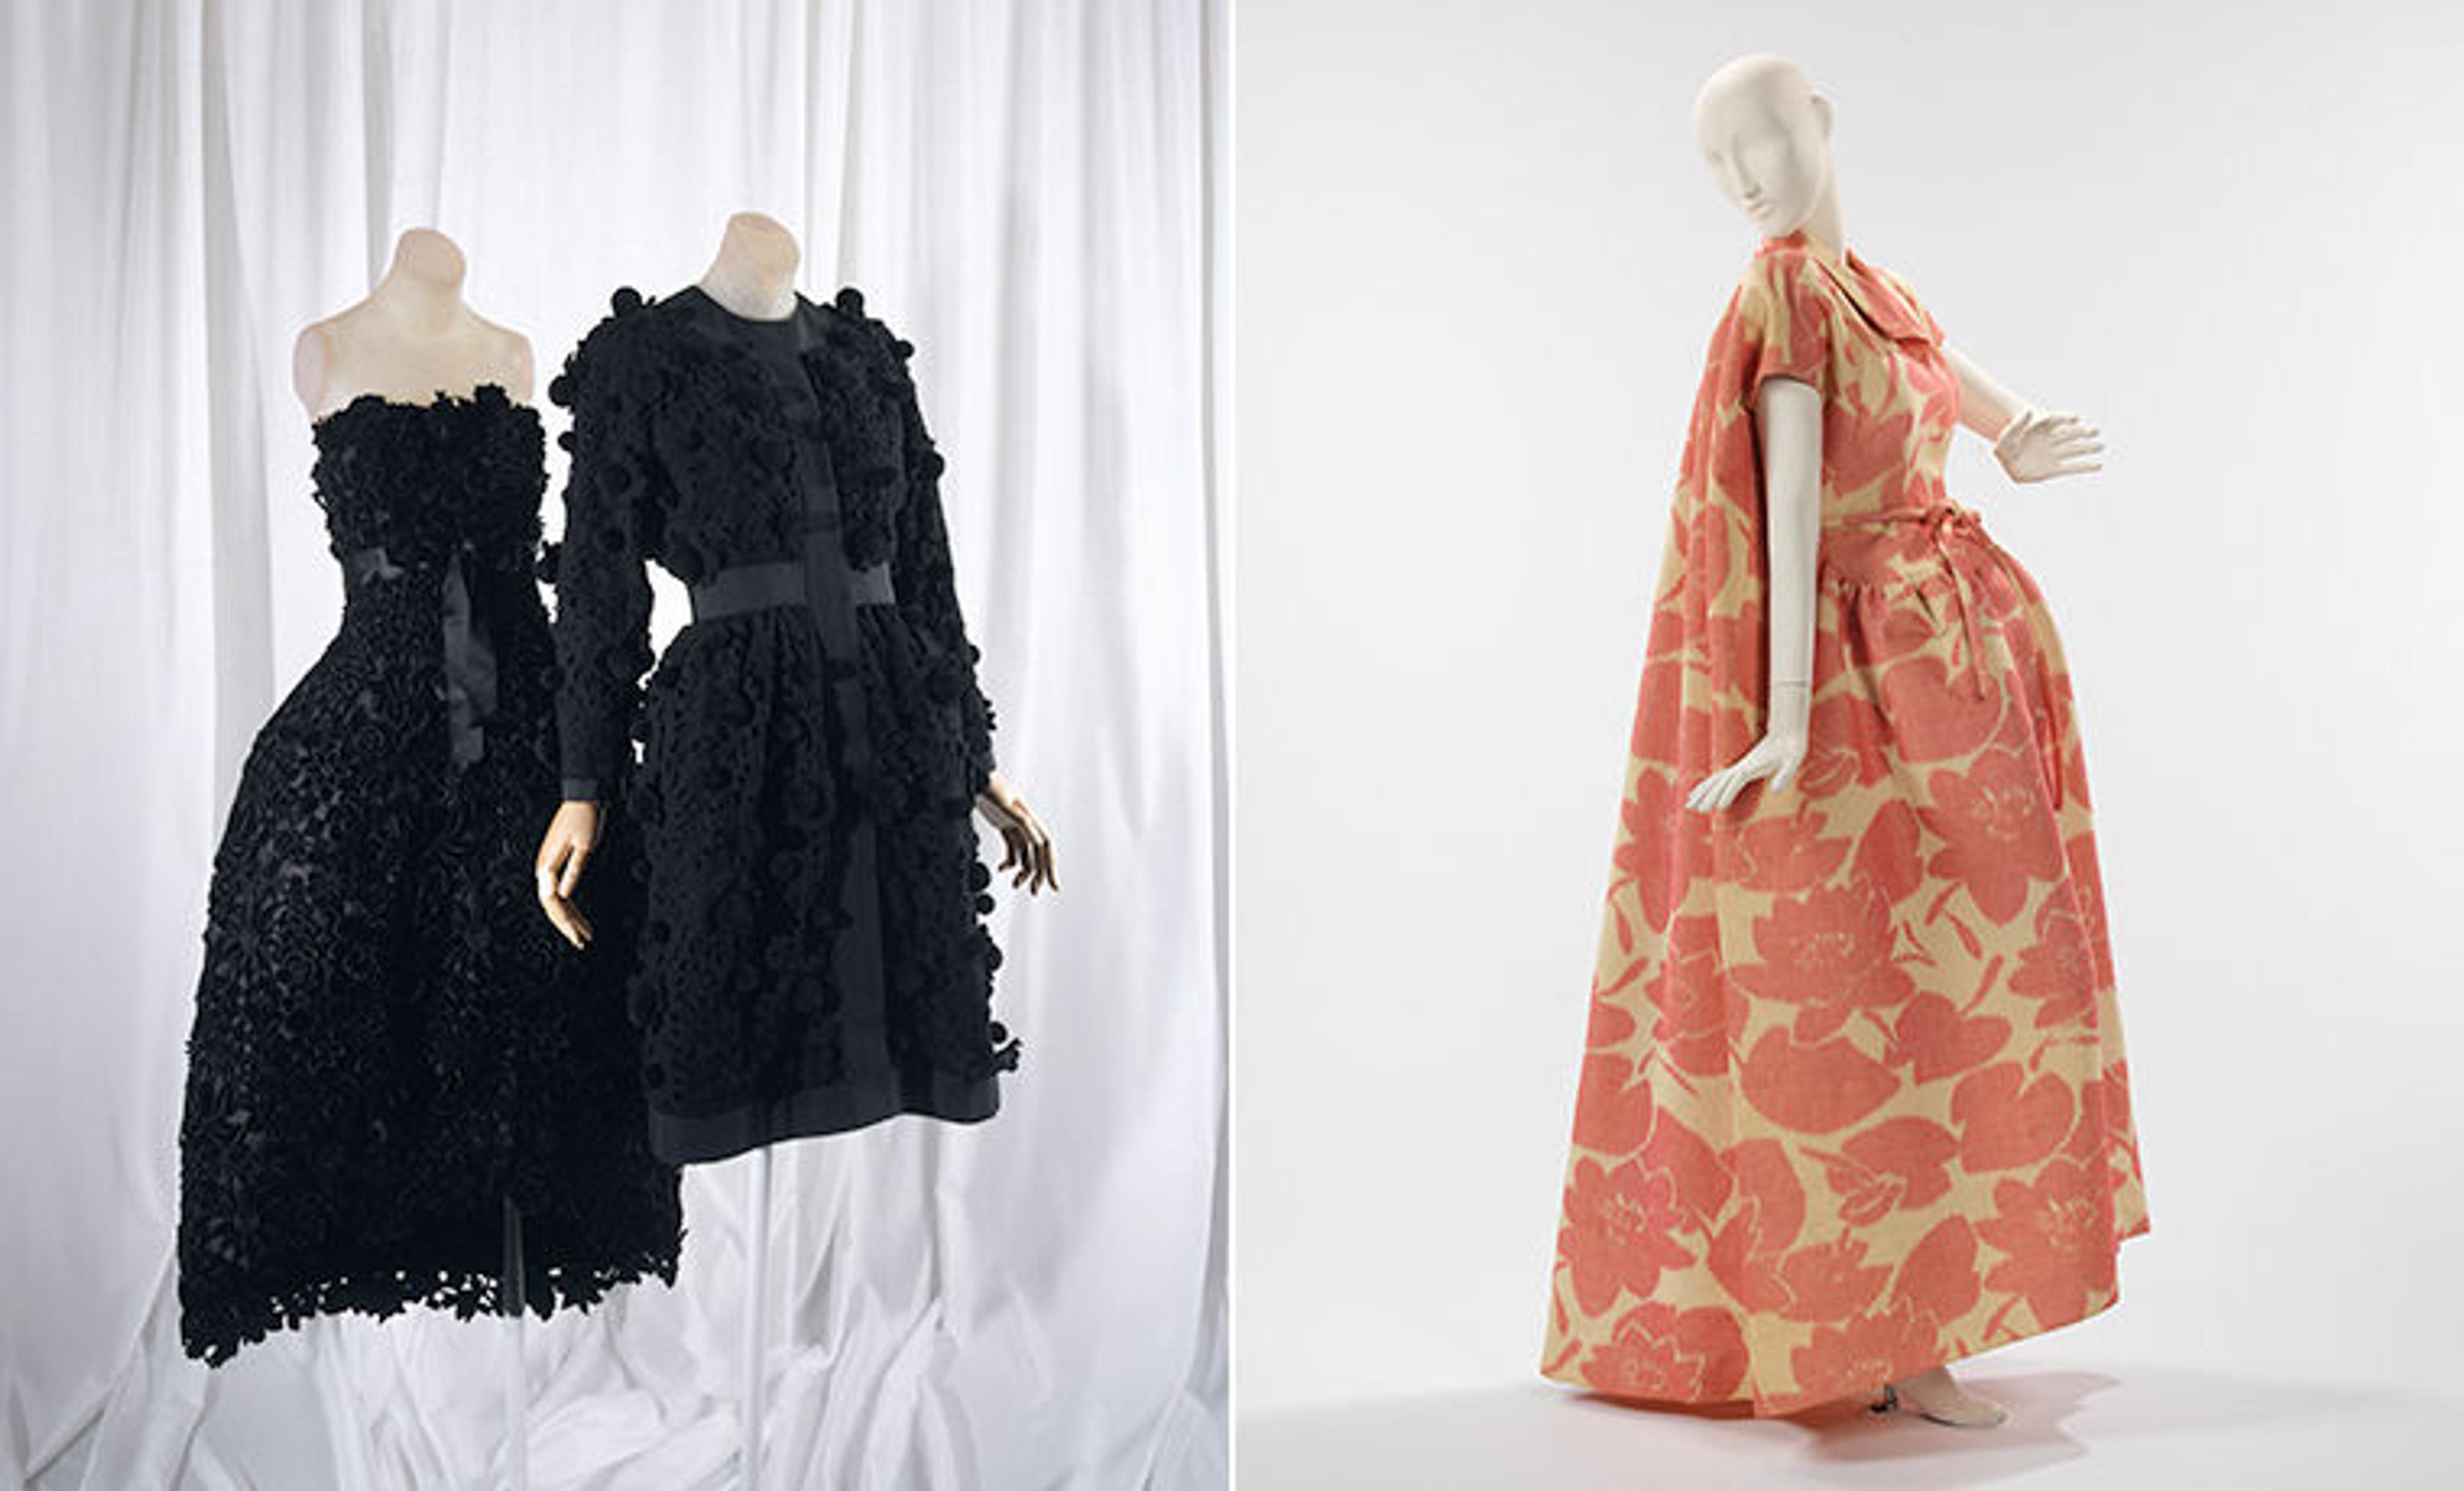 Two dresses by Hubert de Givenchy in The Met collection